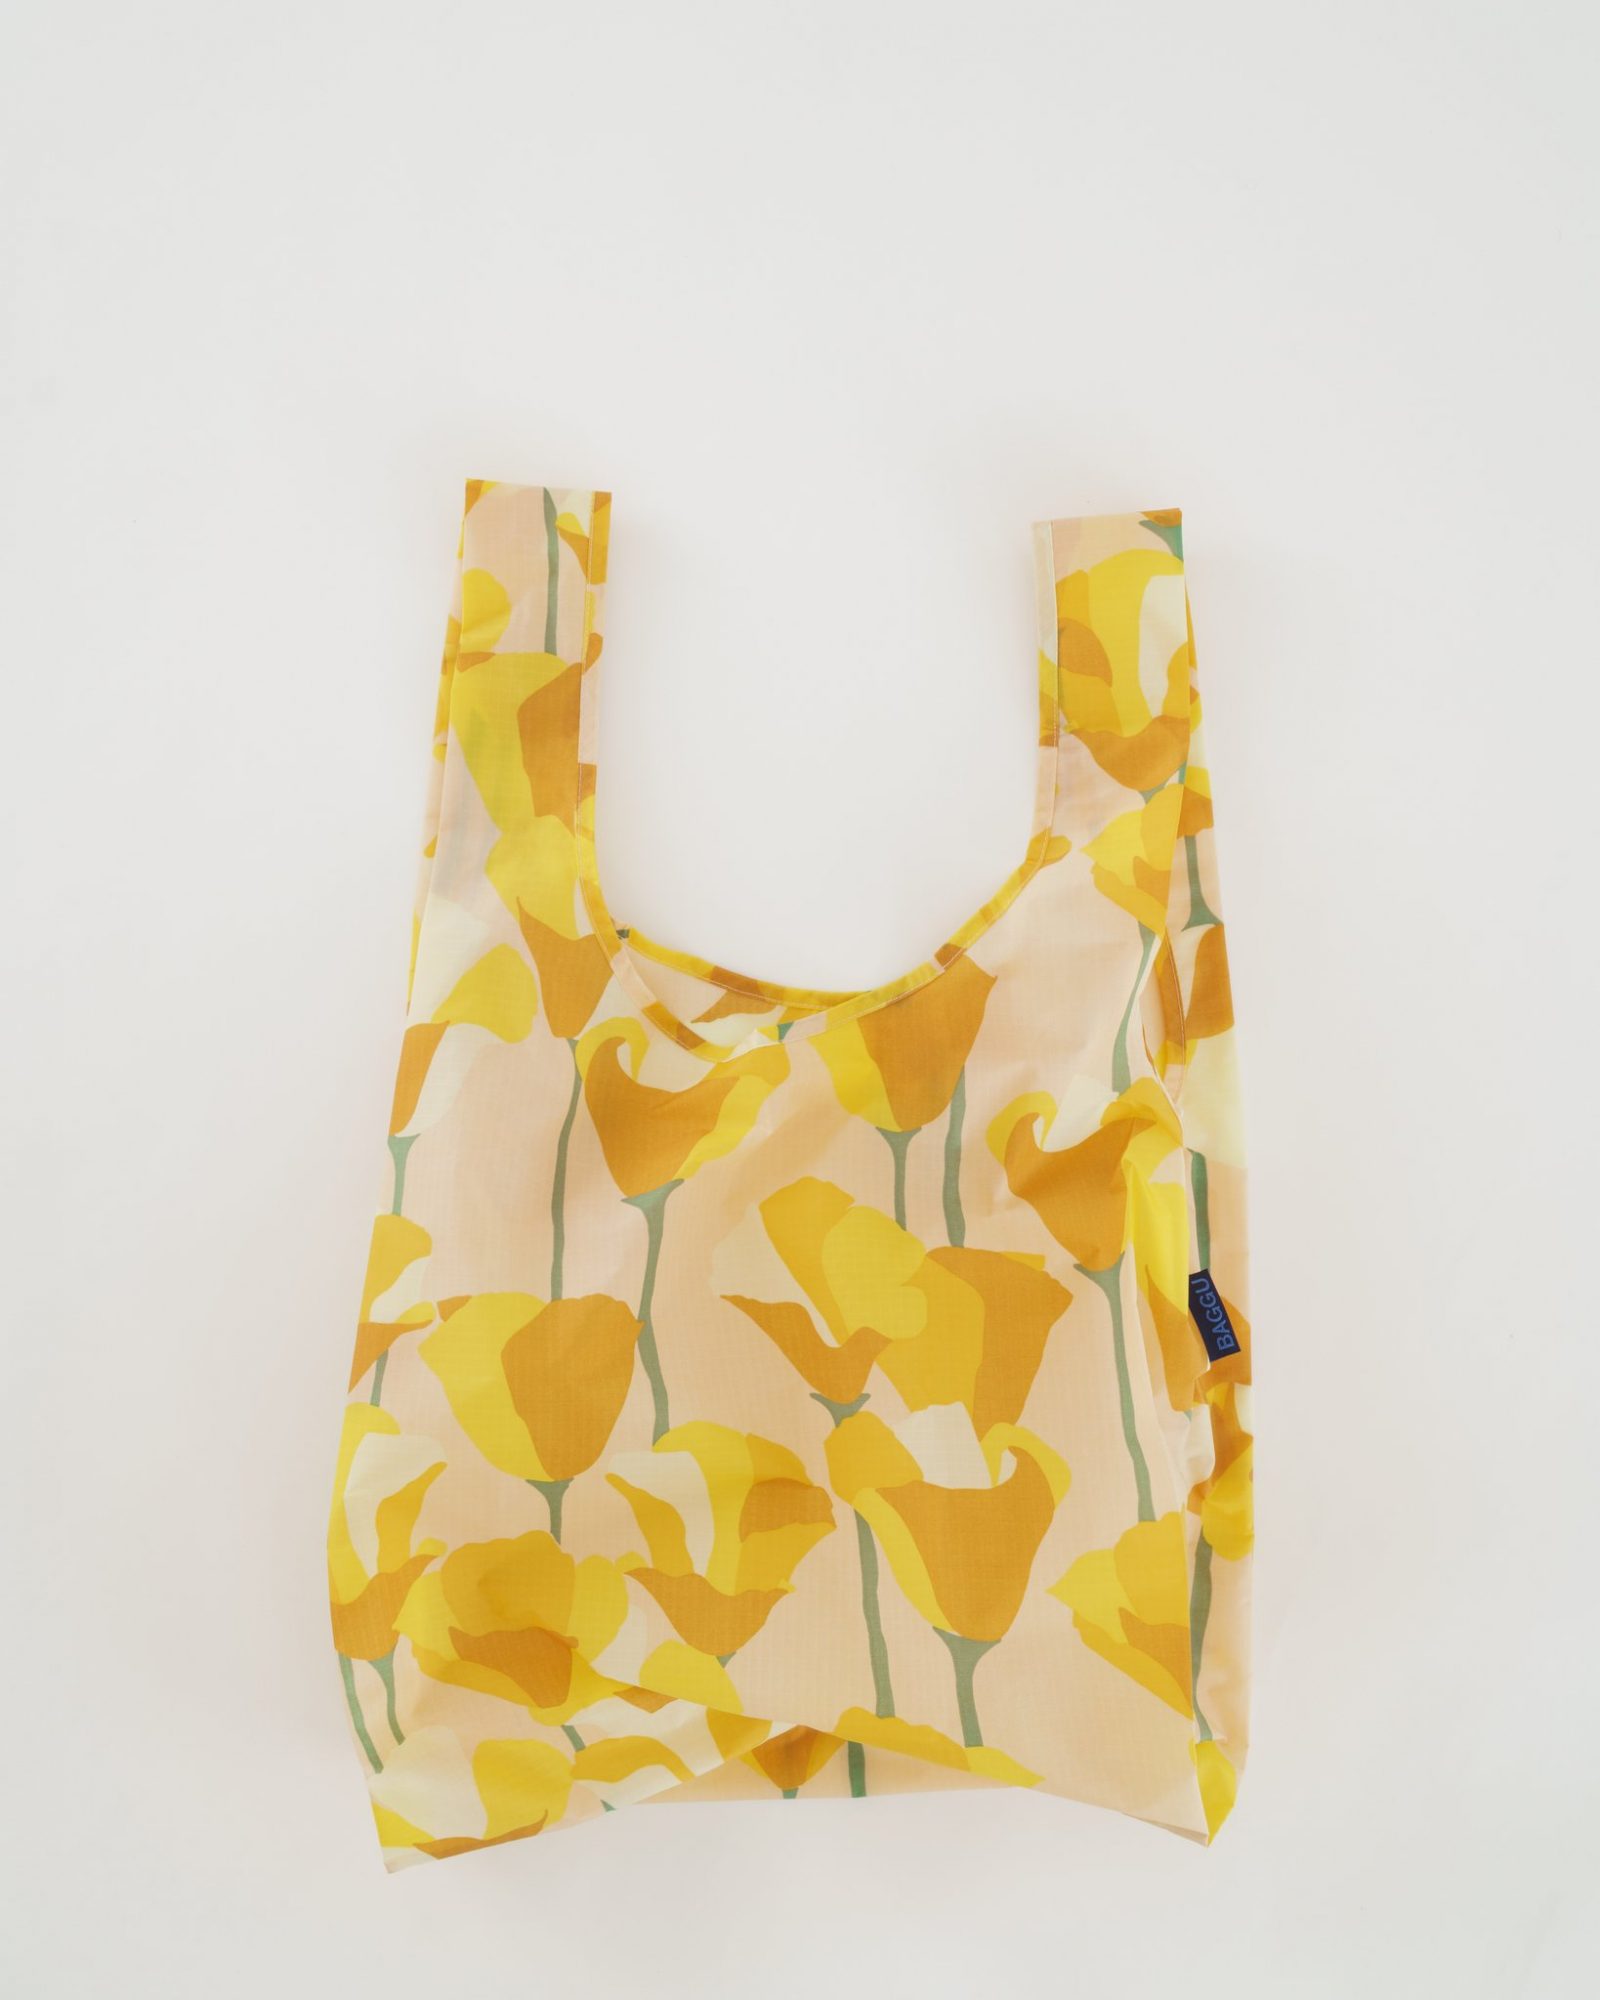 picture-of-reusable-bag-photo